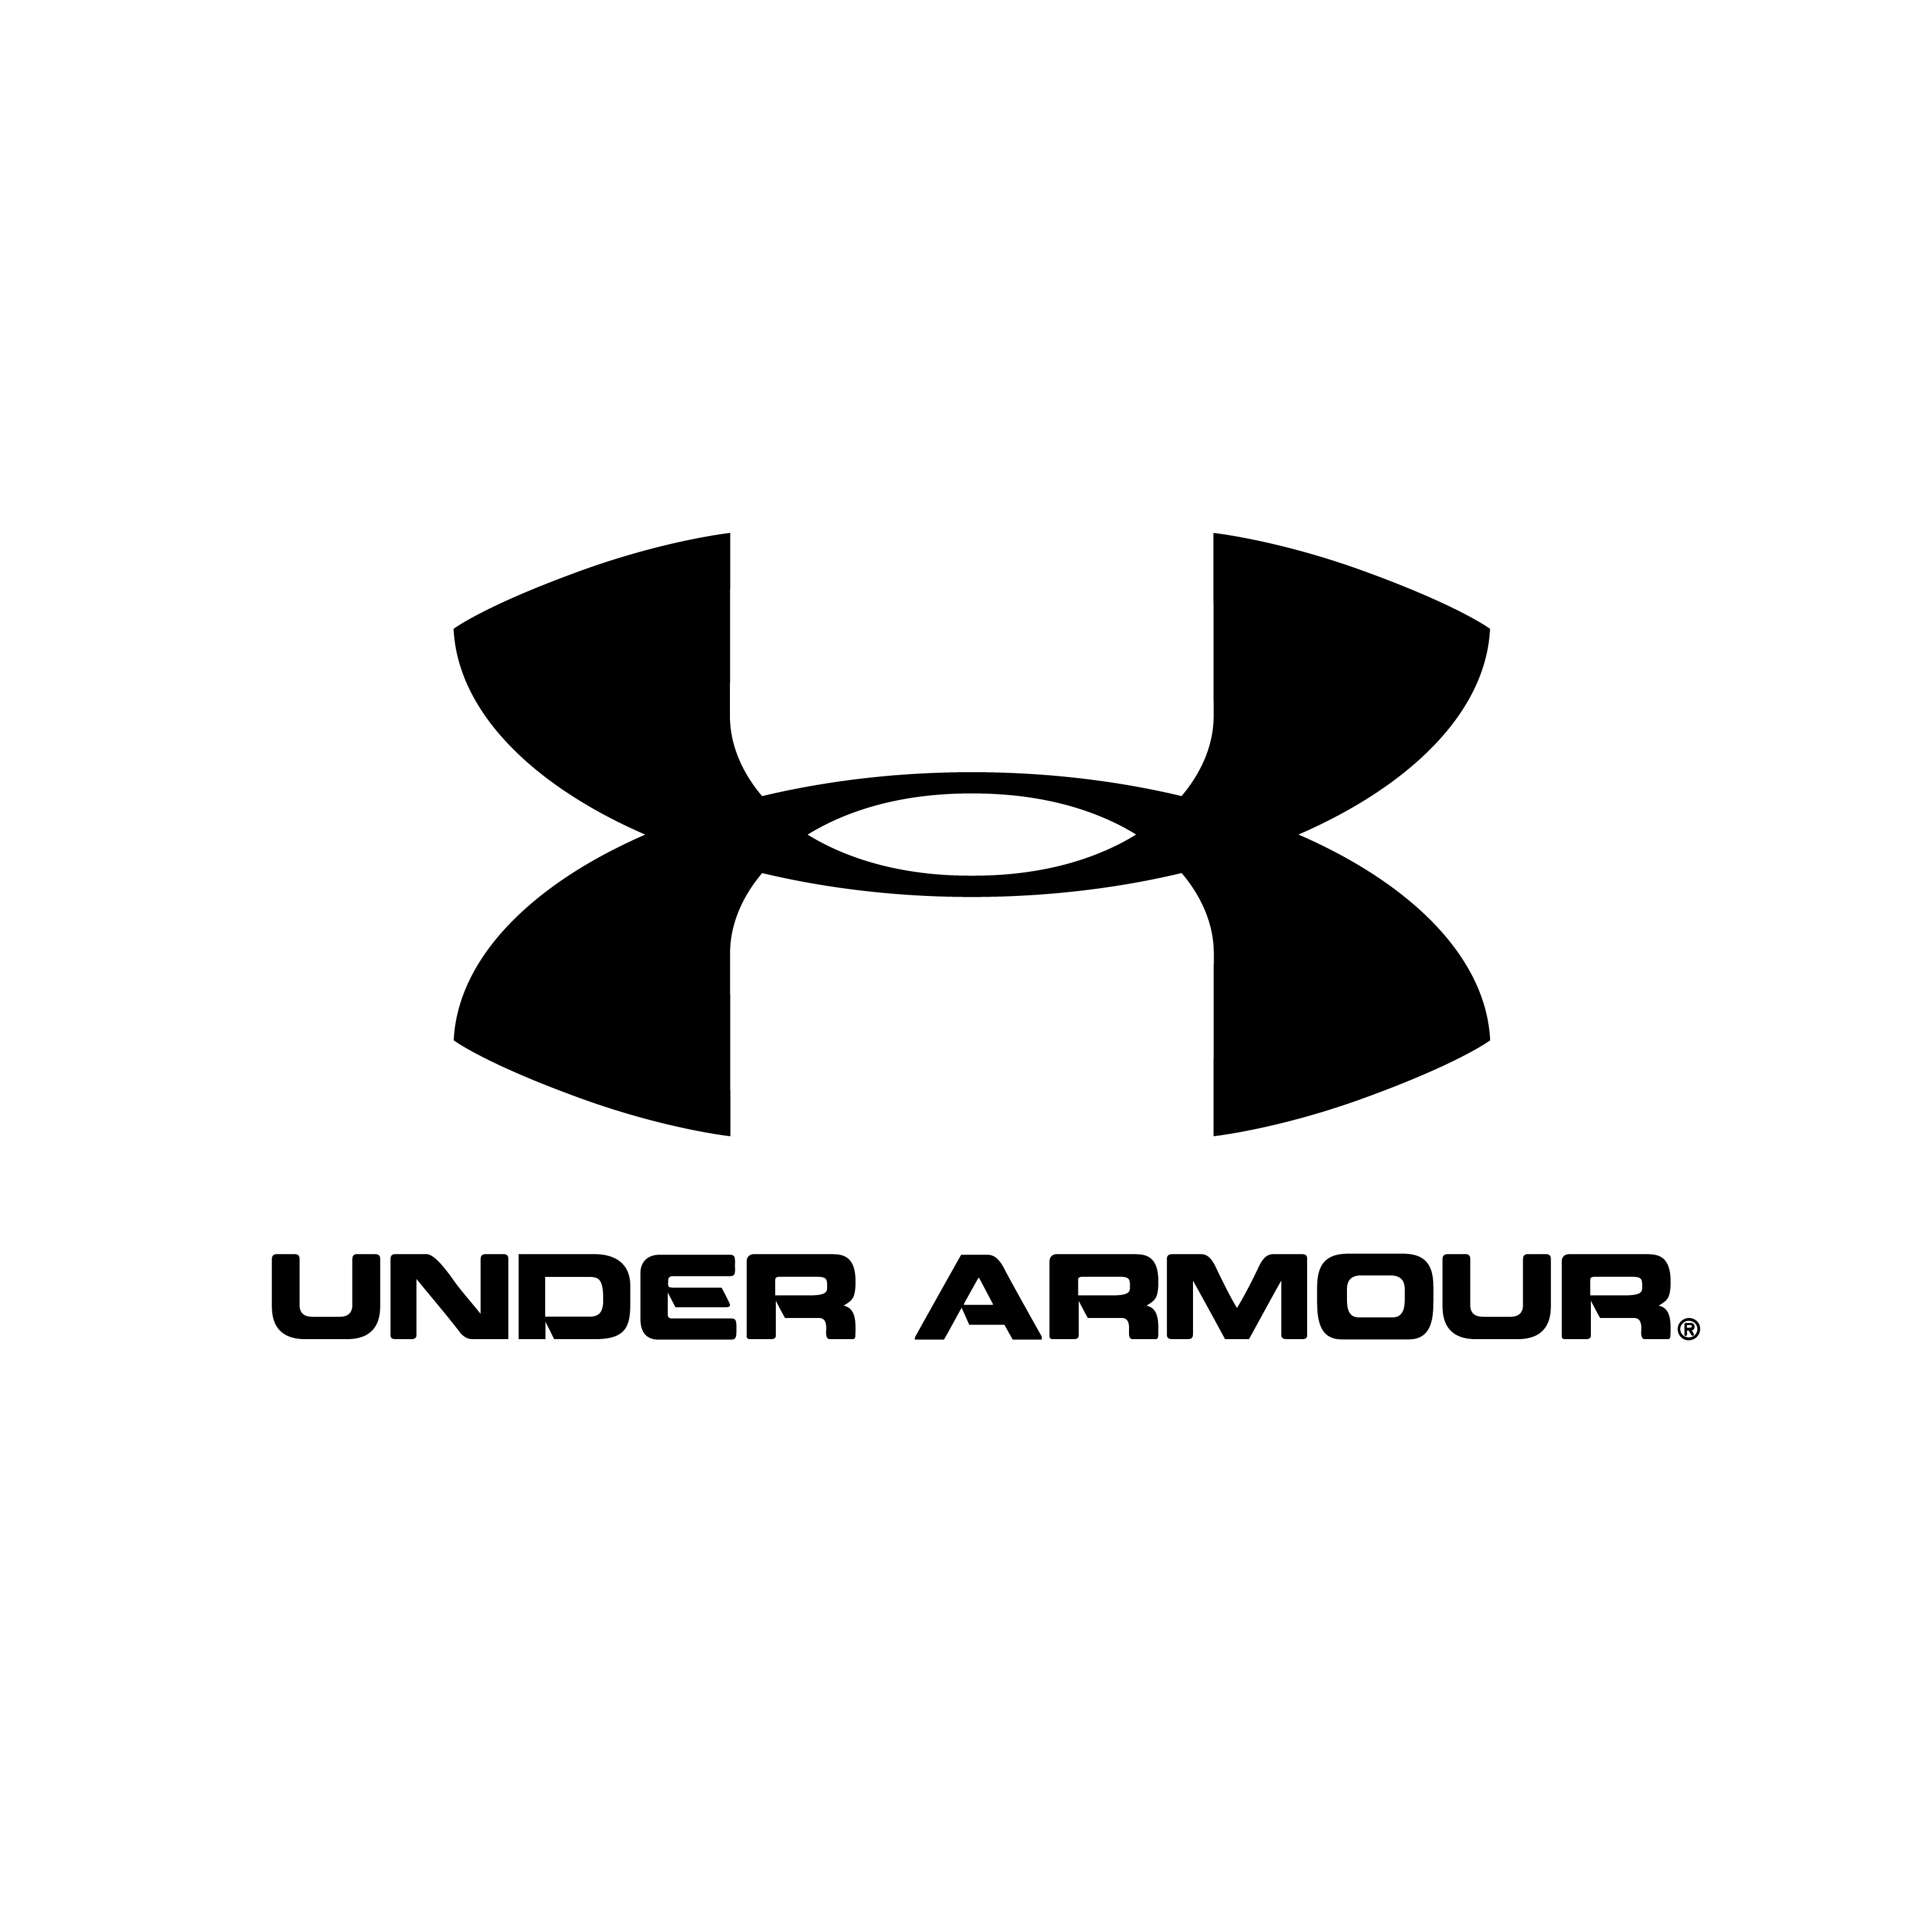 Under Armour Asia Limited